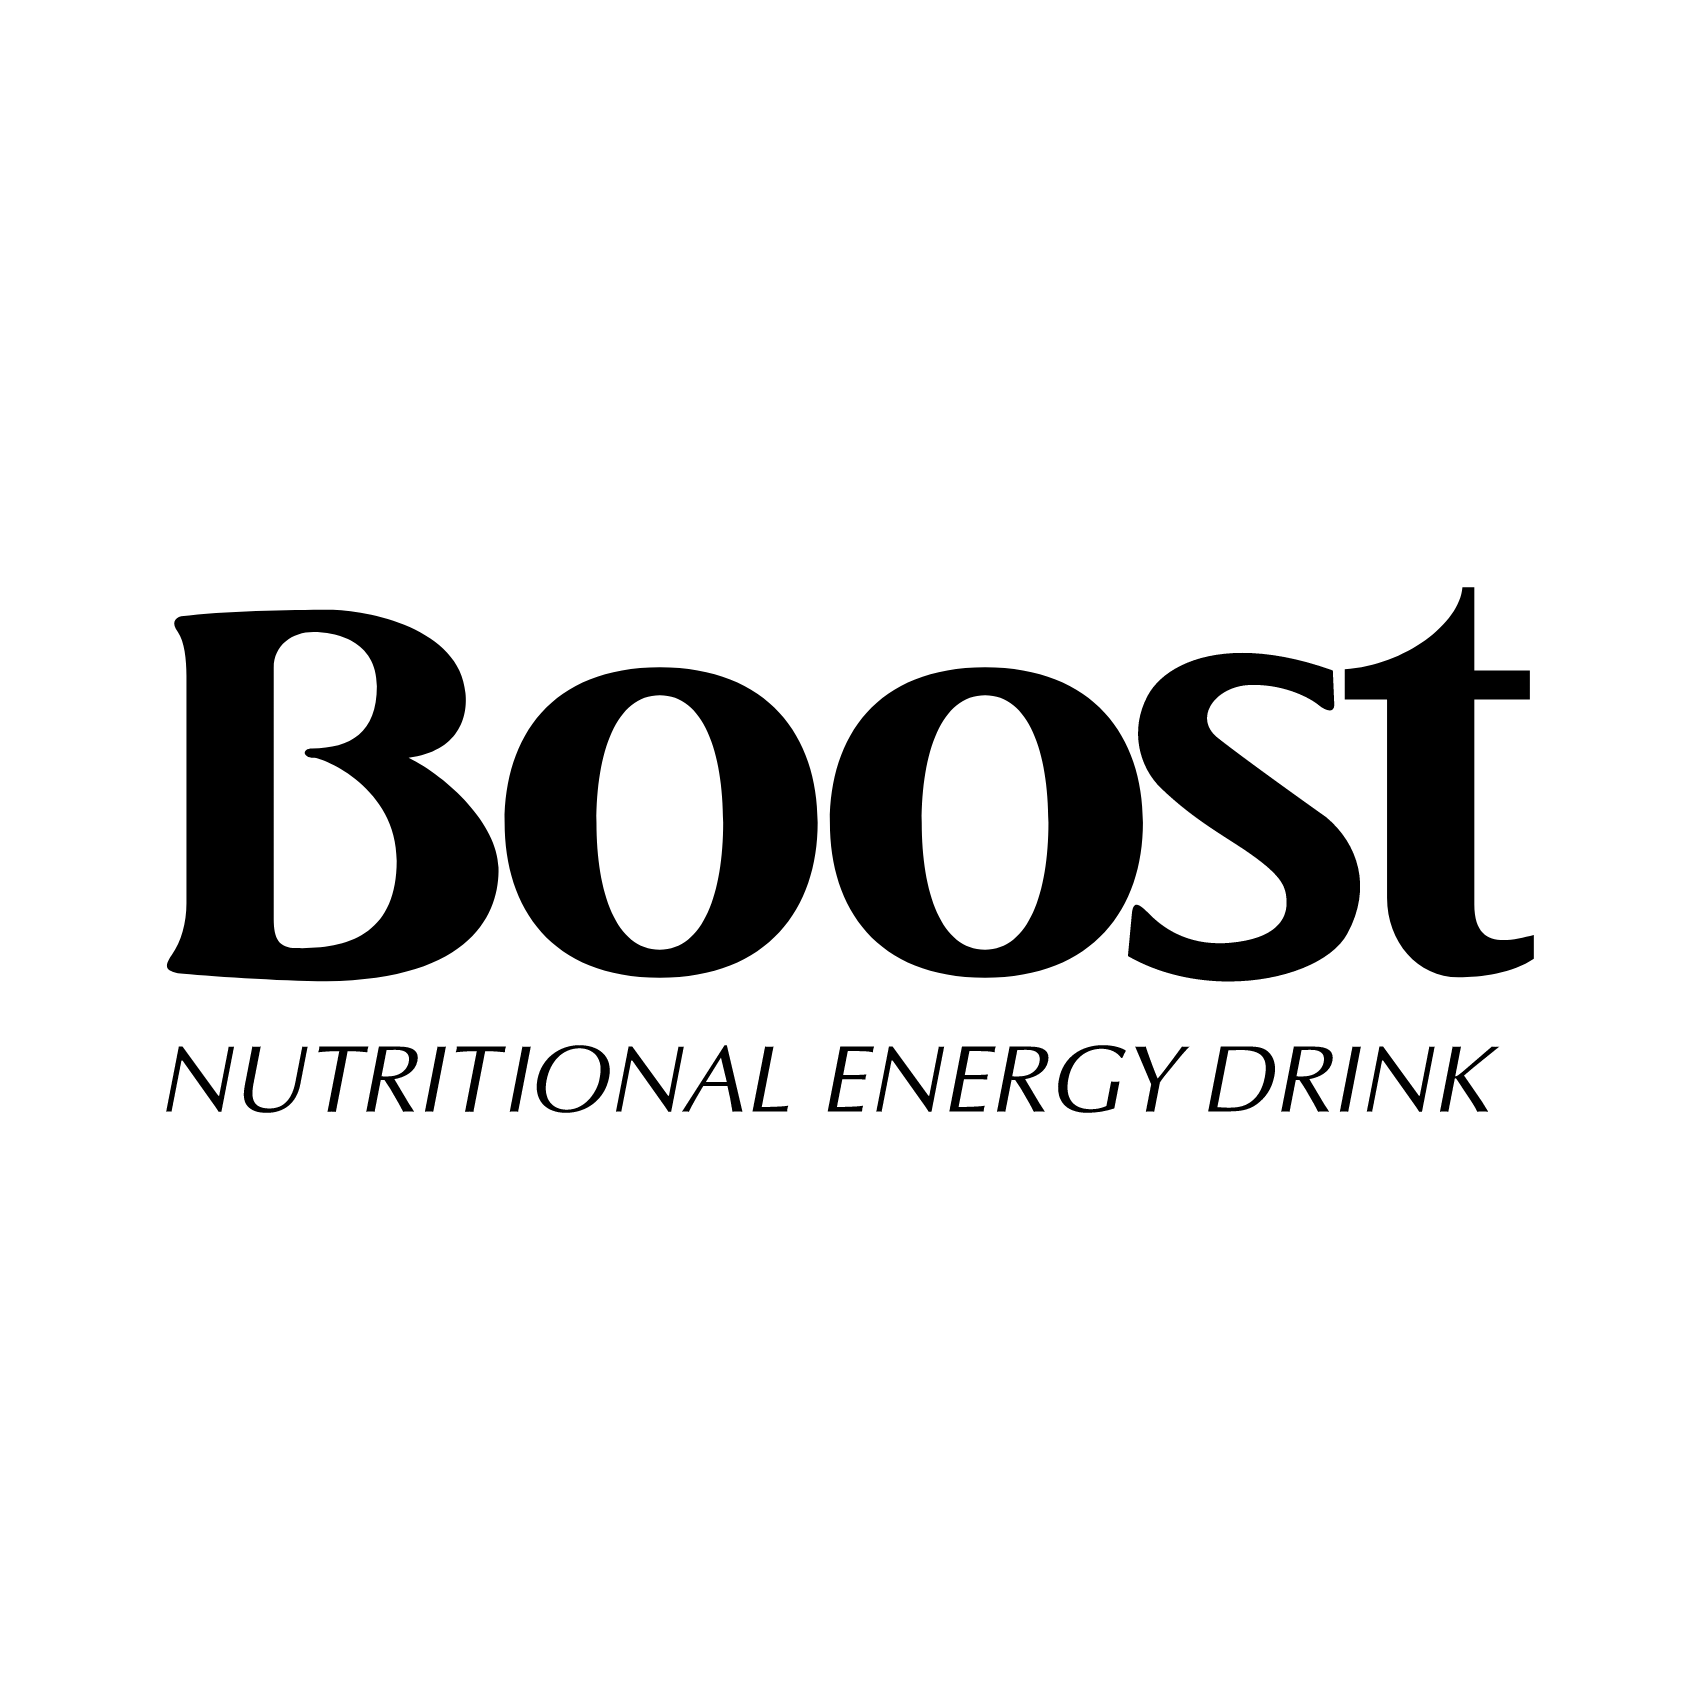 Download Boost energy drink Logo PNG and Vector (PDF, SVG, Ai, EPS) Free